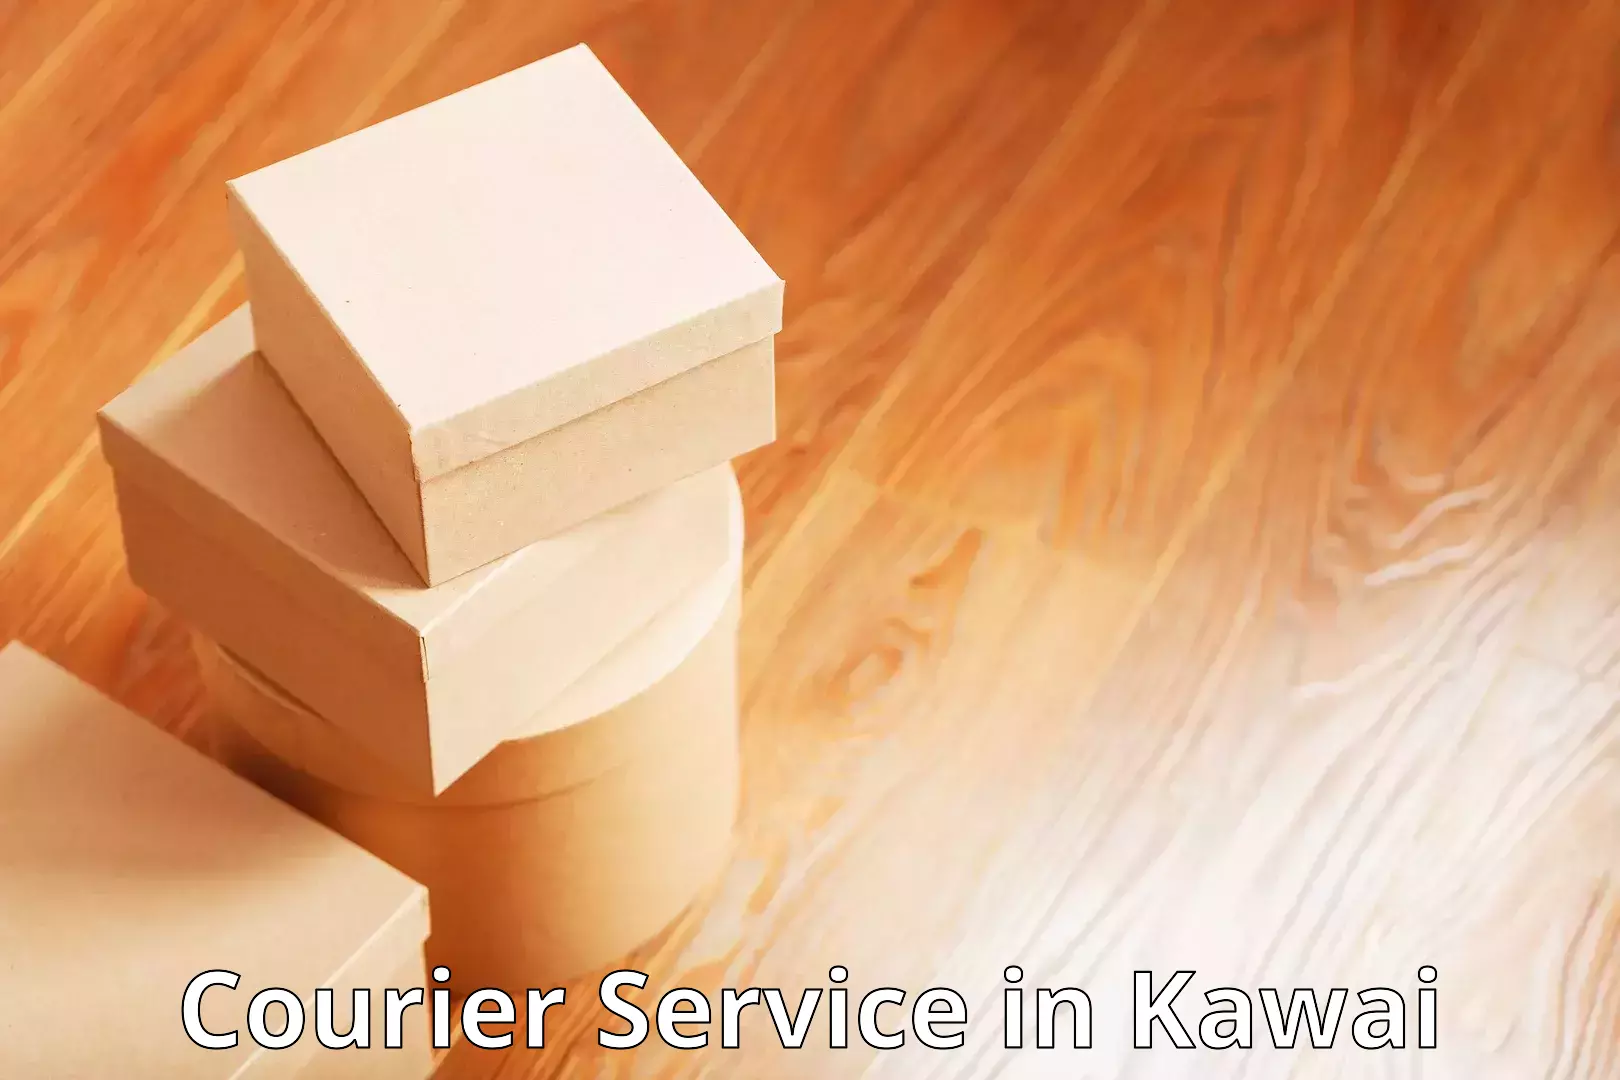 Delivery service partnership in Kawai